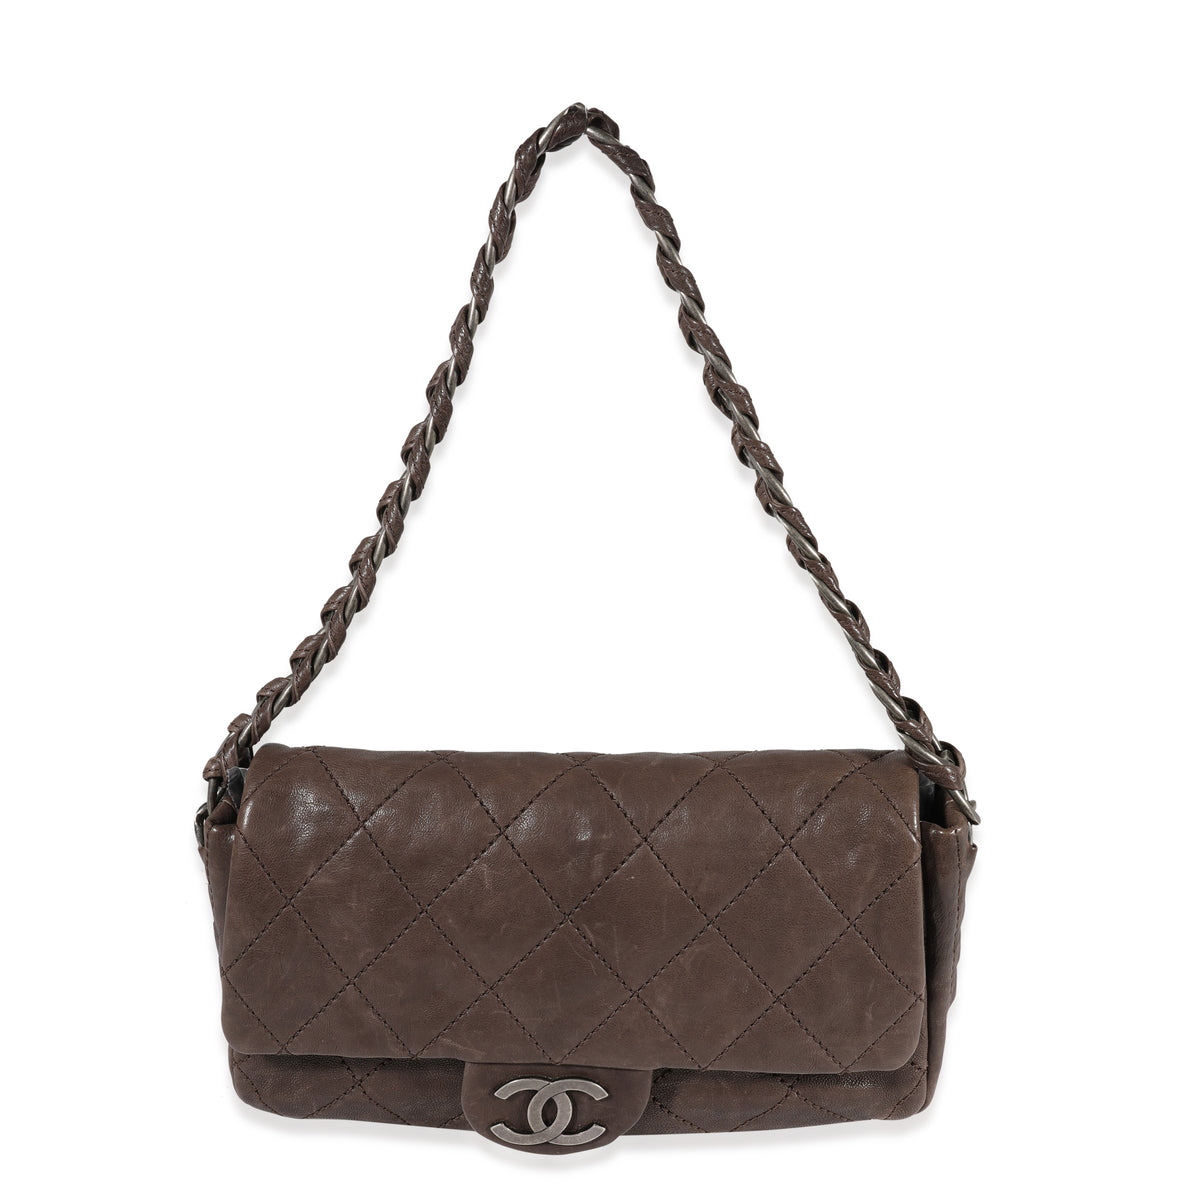 Chanel Brown Distressed Leather Modern Chain Flap Bag